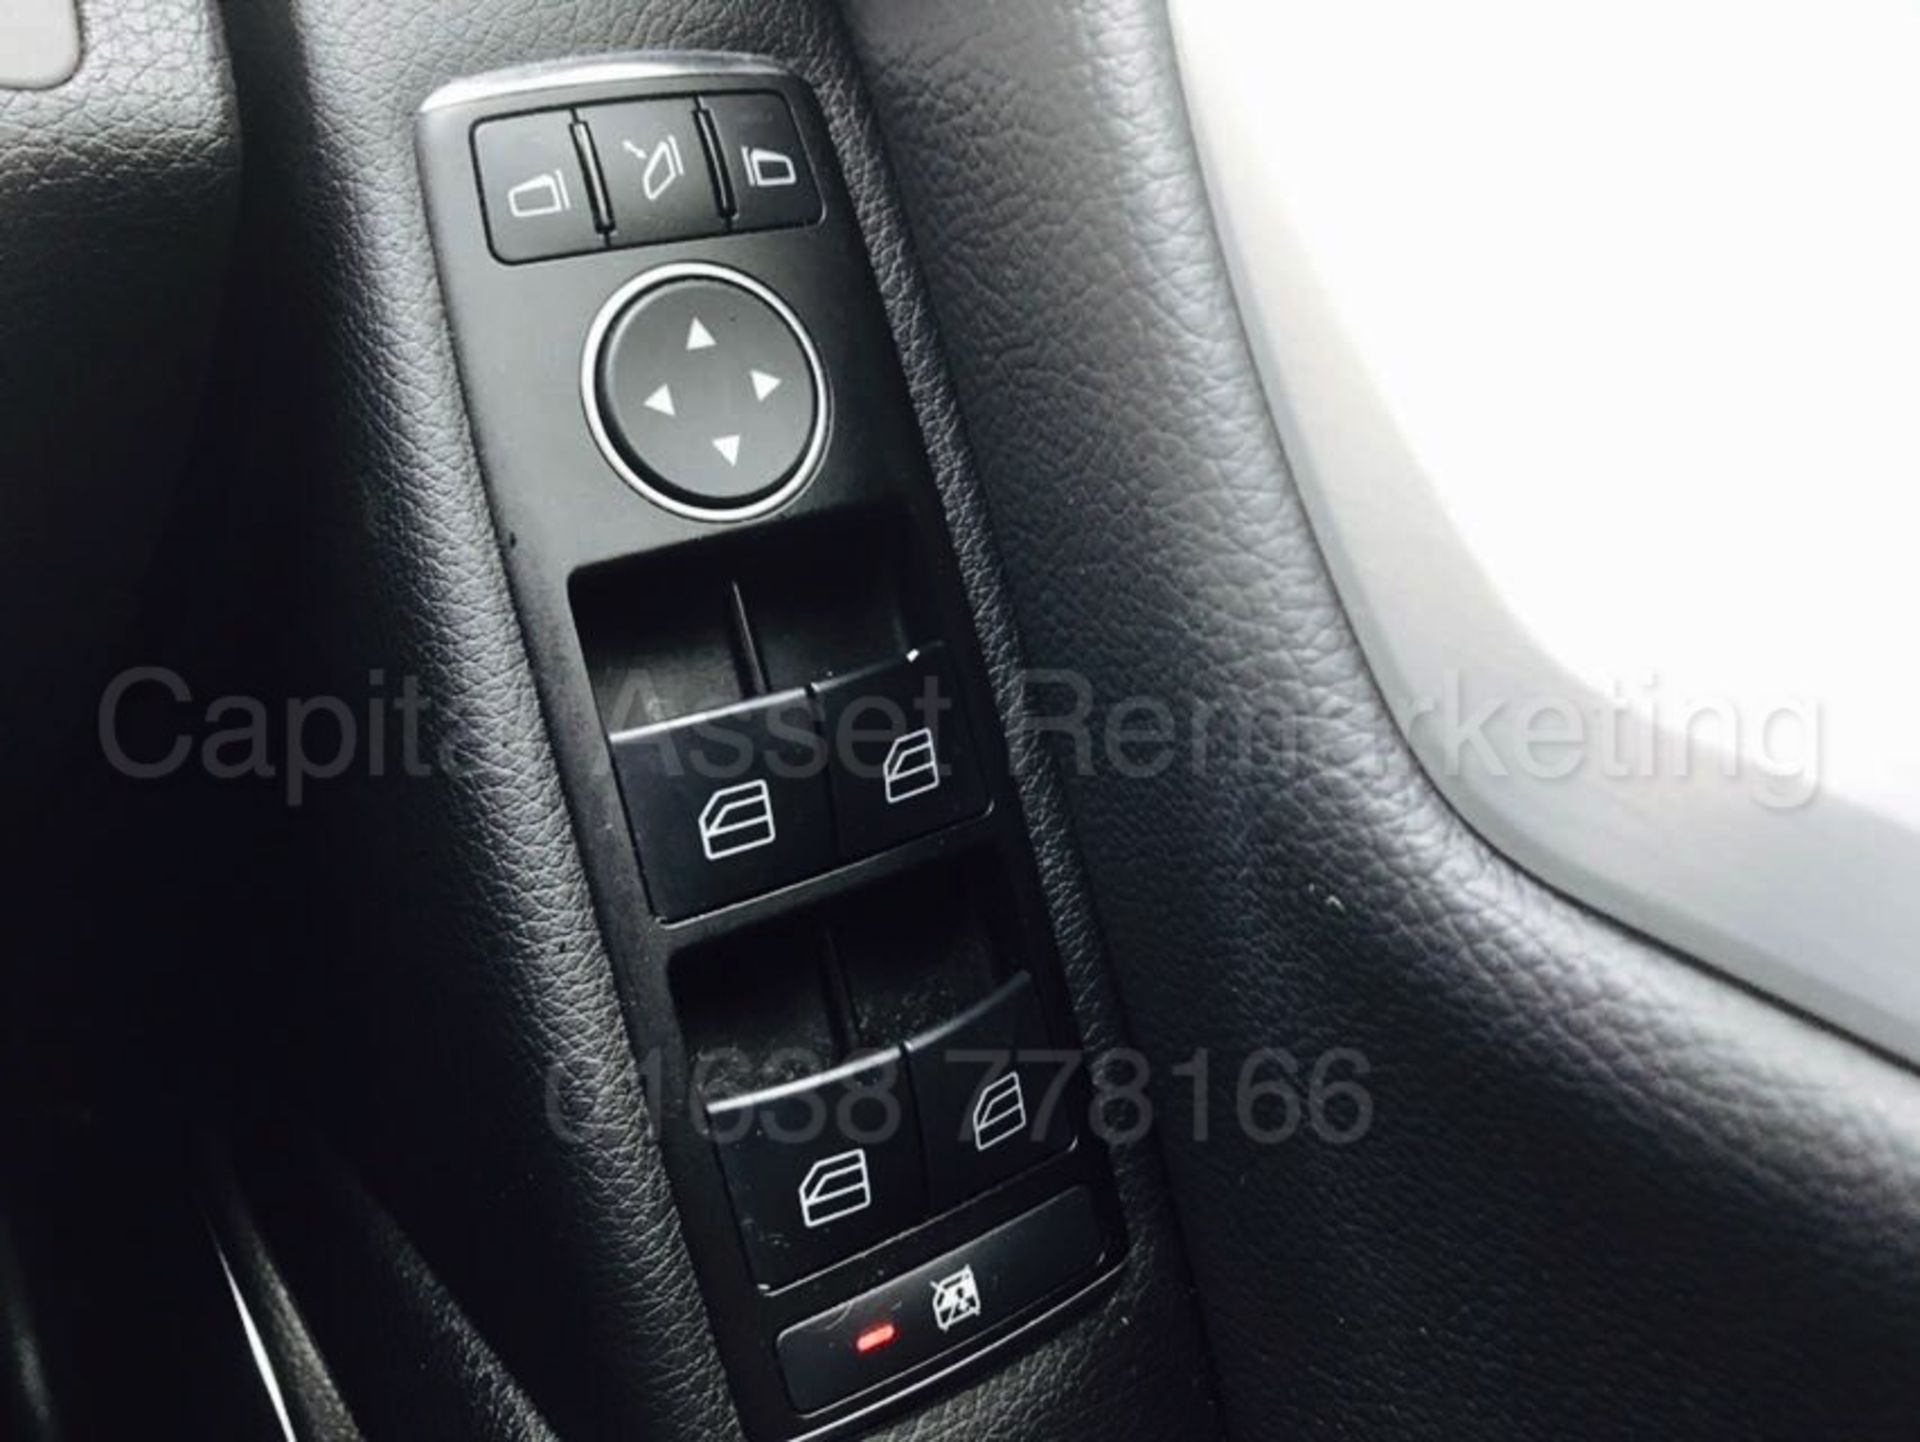 MERCEDES C220CDI "SPORT" ESTATE "125 EDITION" AUTOMATIC (2012 MODEL) SAT NAV - LEATHER - Image 18 of 19